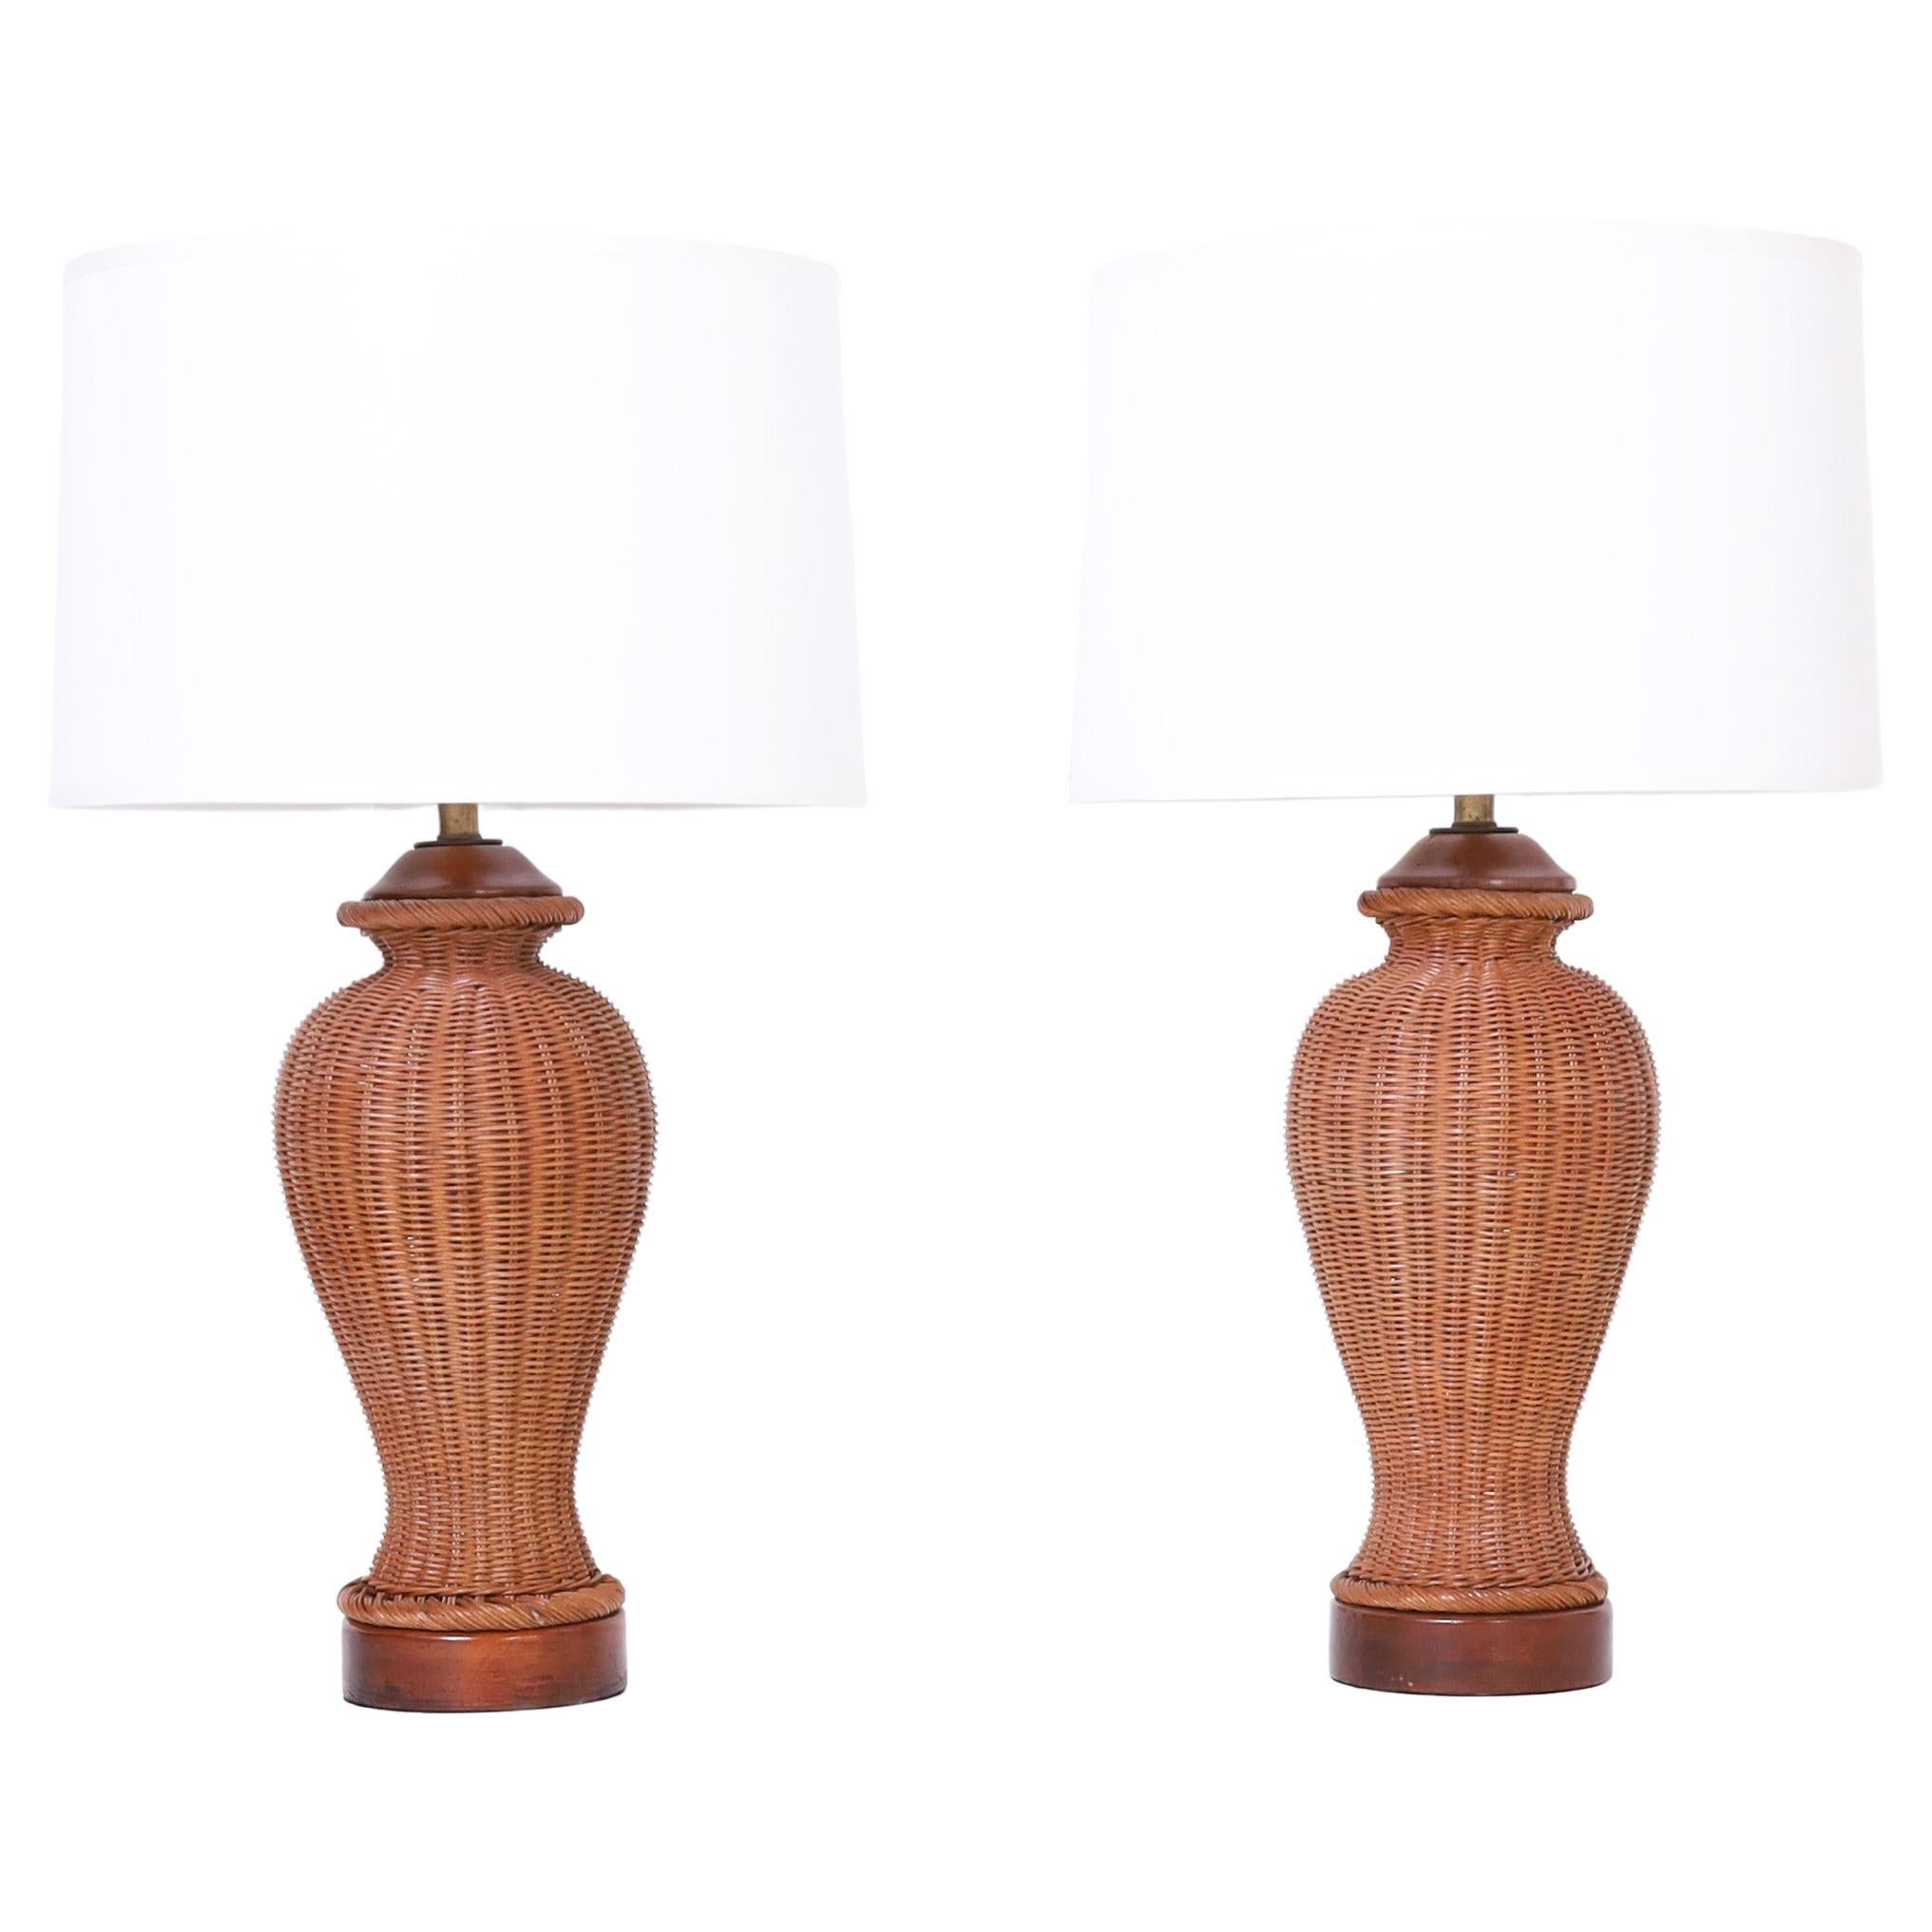  Pair of Mid Century Wicker Table Lamps